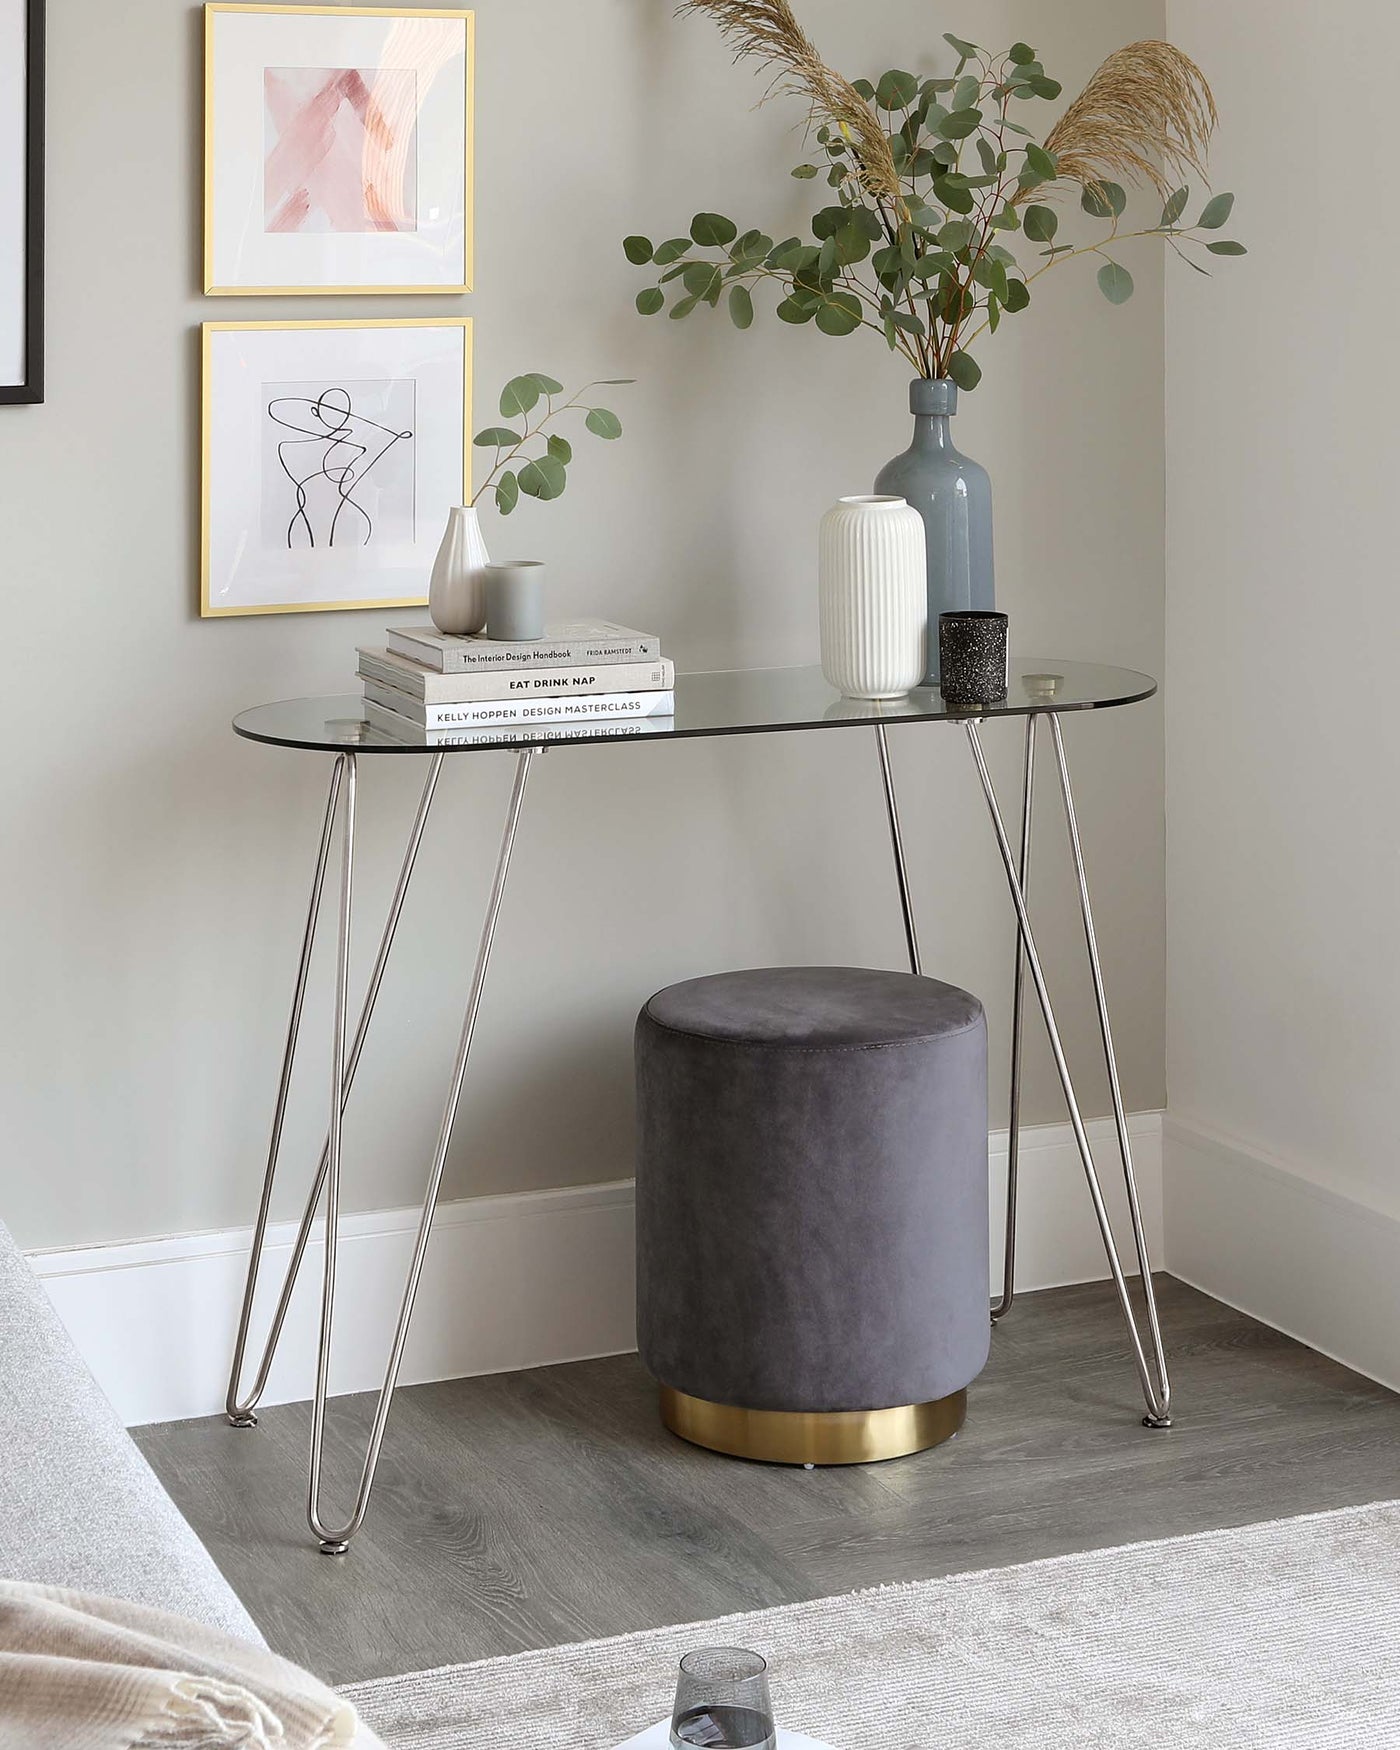 An elegant, modern console table with a sleek, round glass top and slender, tapered metallic legs alongside a chic, grey upholstered ottoman with a golden base.